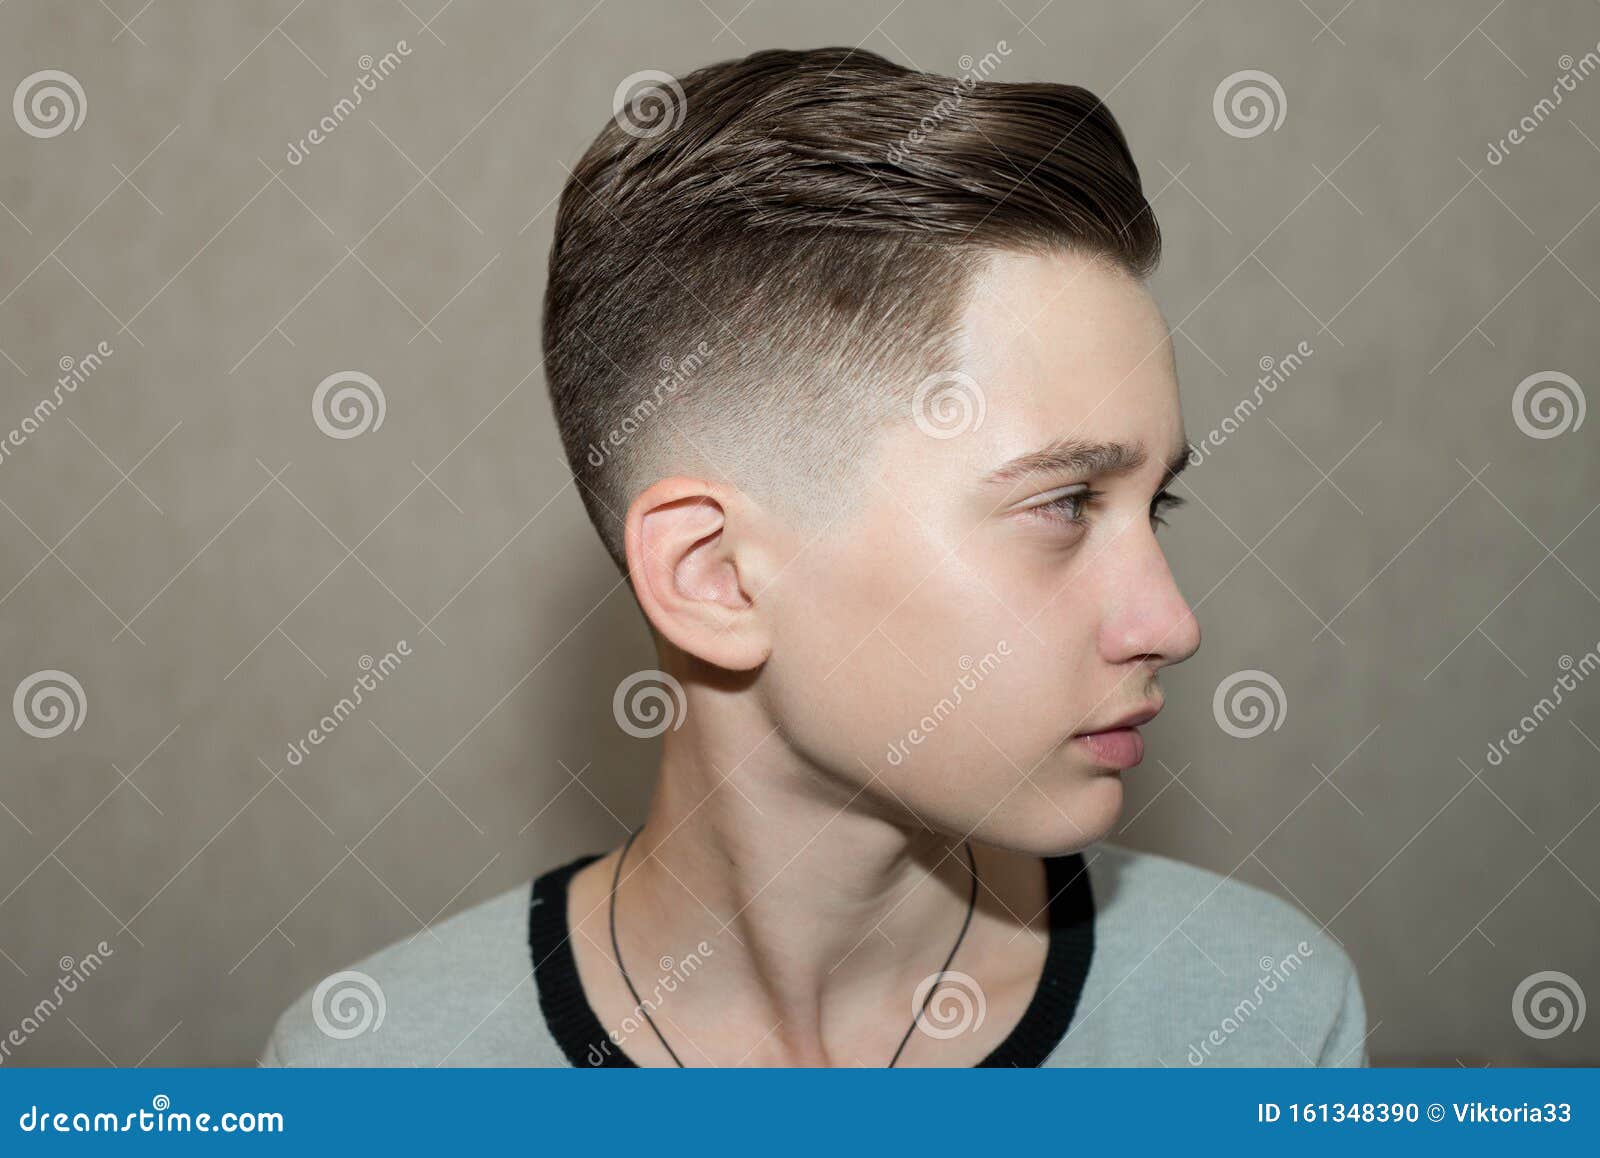 hairstyles for school boys - video Dailymotion